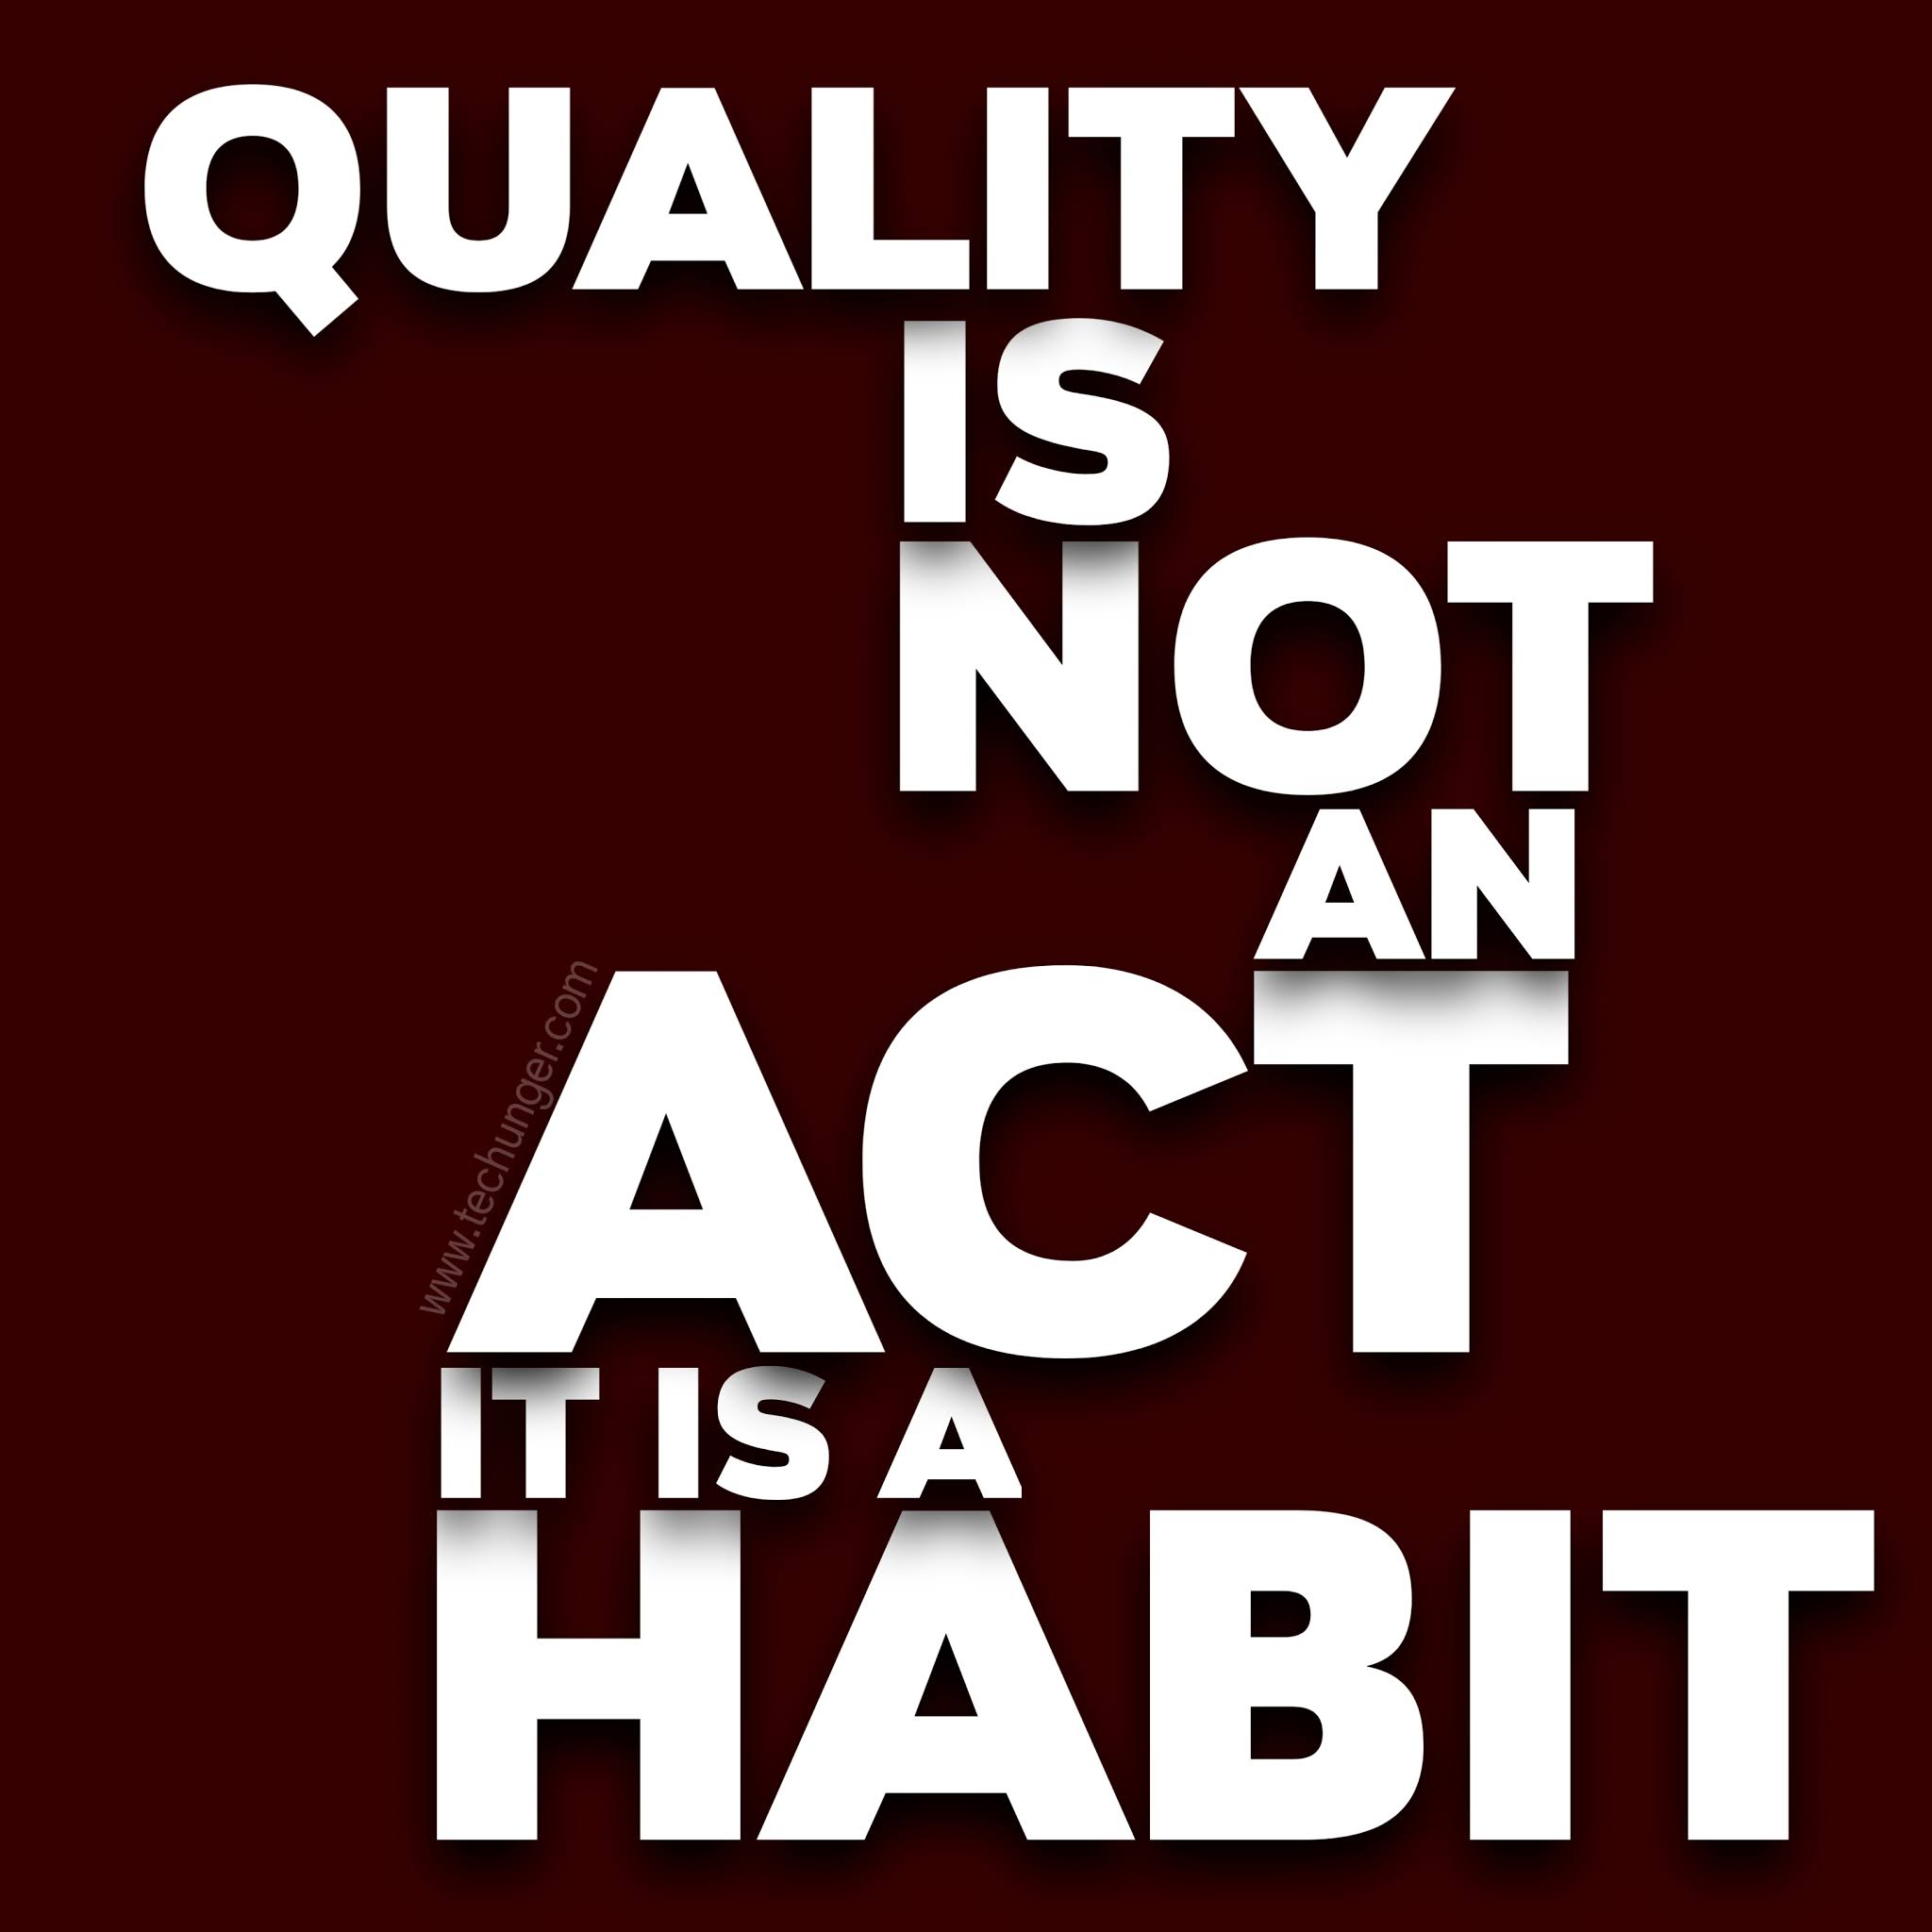  Quality is not an act it is habit.